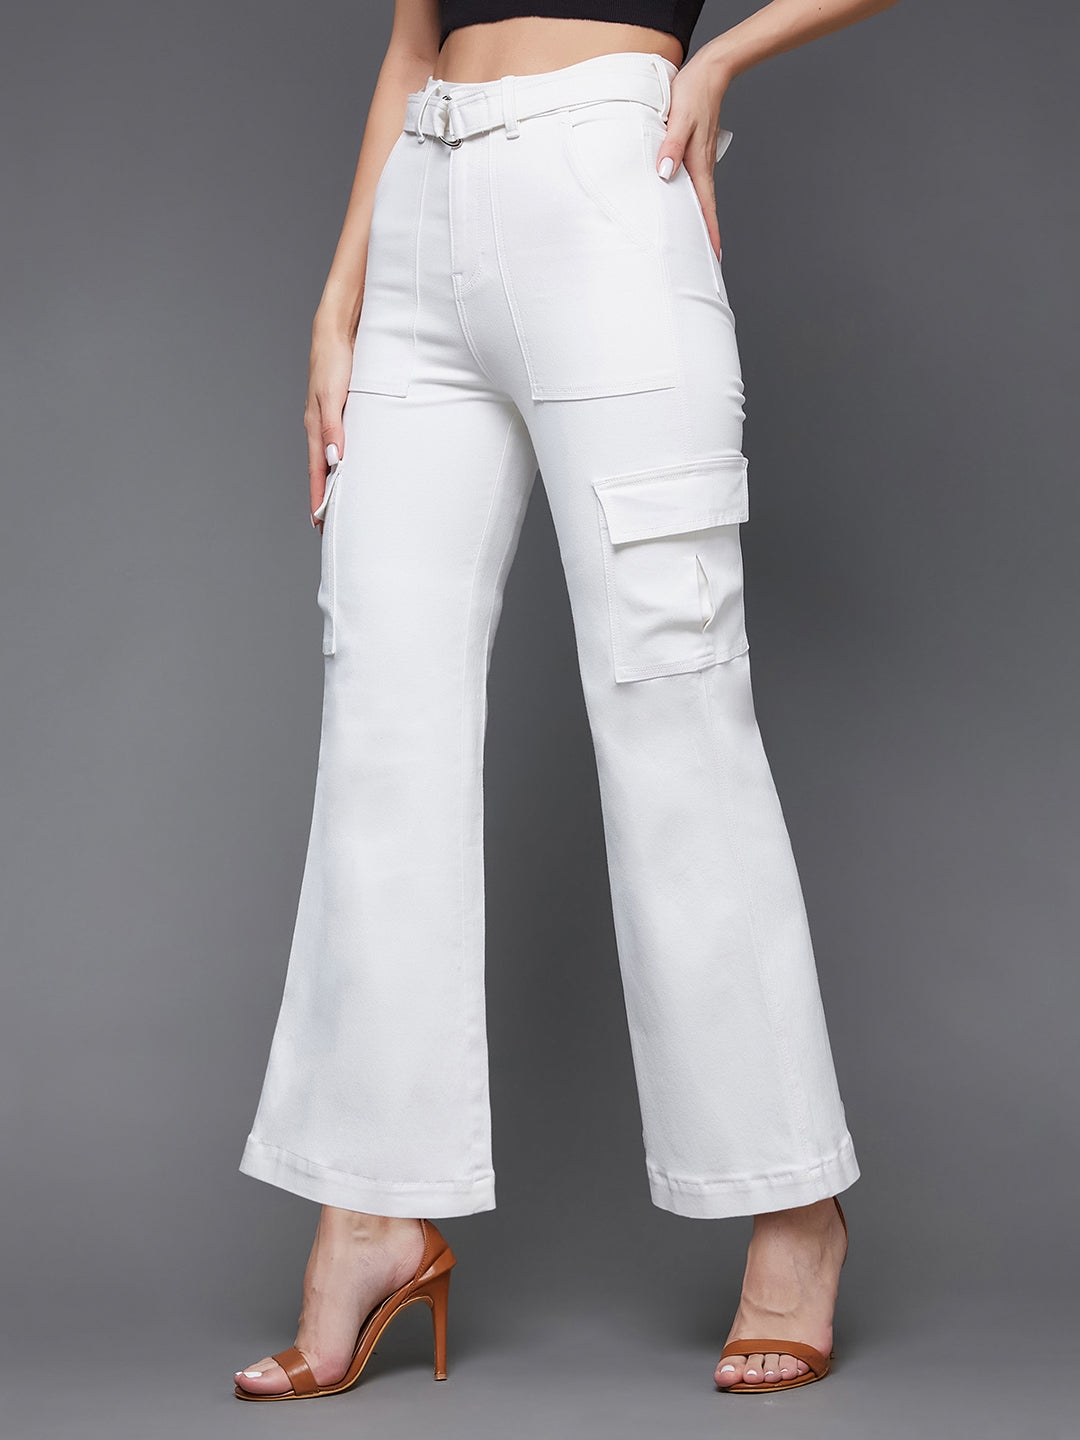 MISS CHASE | White Wide Leg High Rise Clean Look Regular Stretchable Denim Jeans